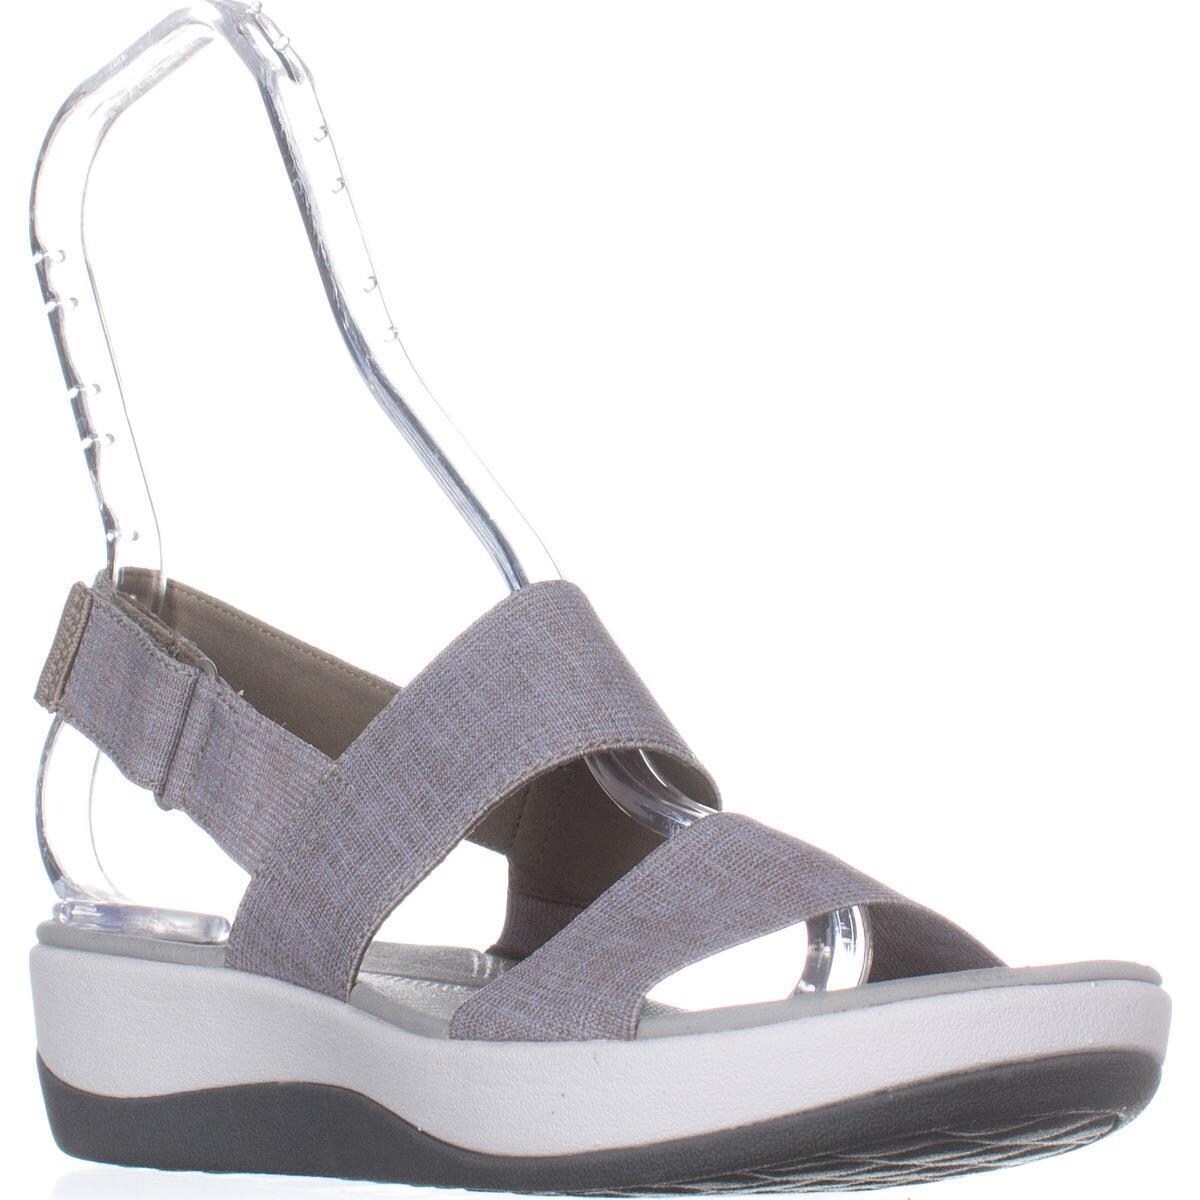 cloudsteppers by clarks arla jacory sandal